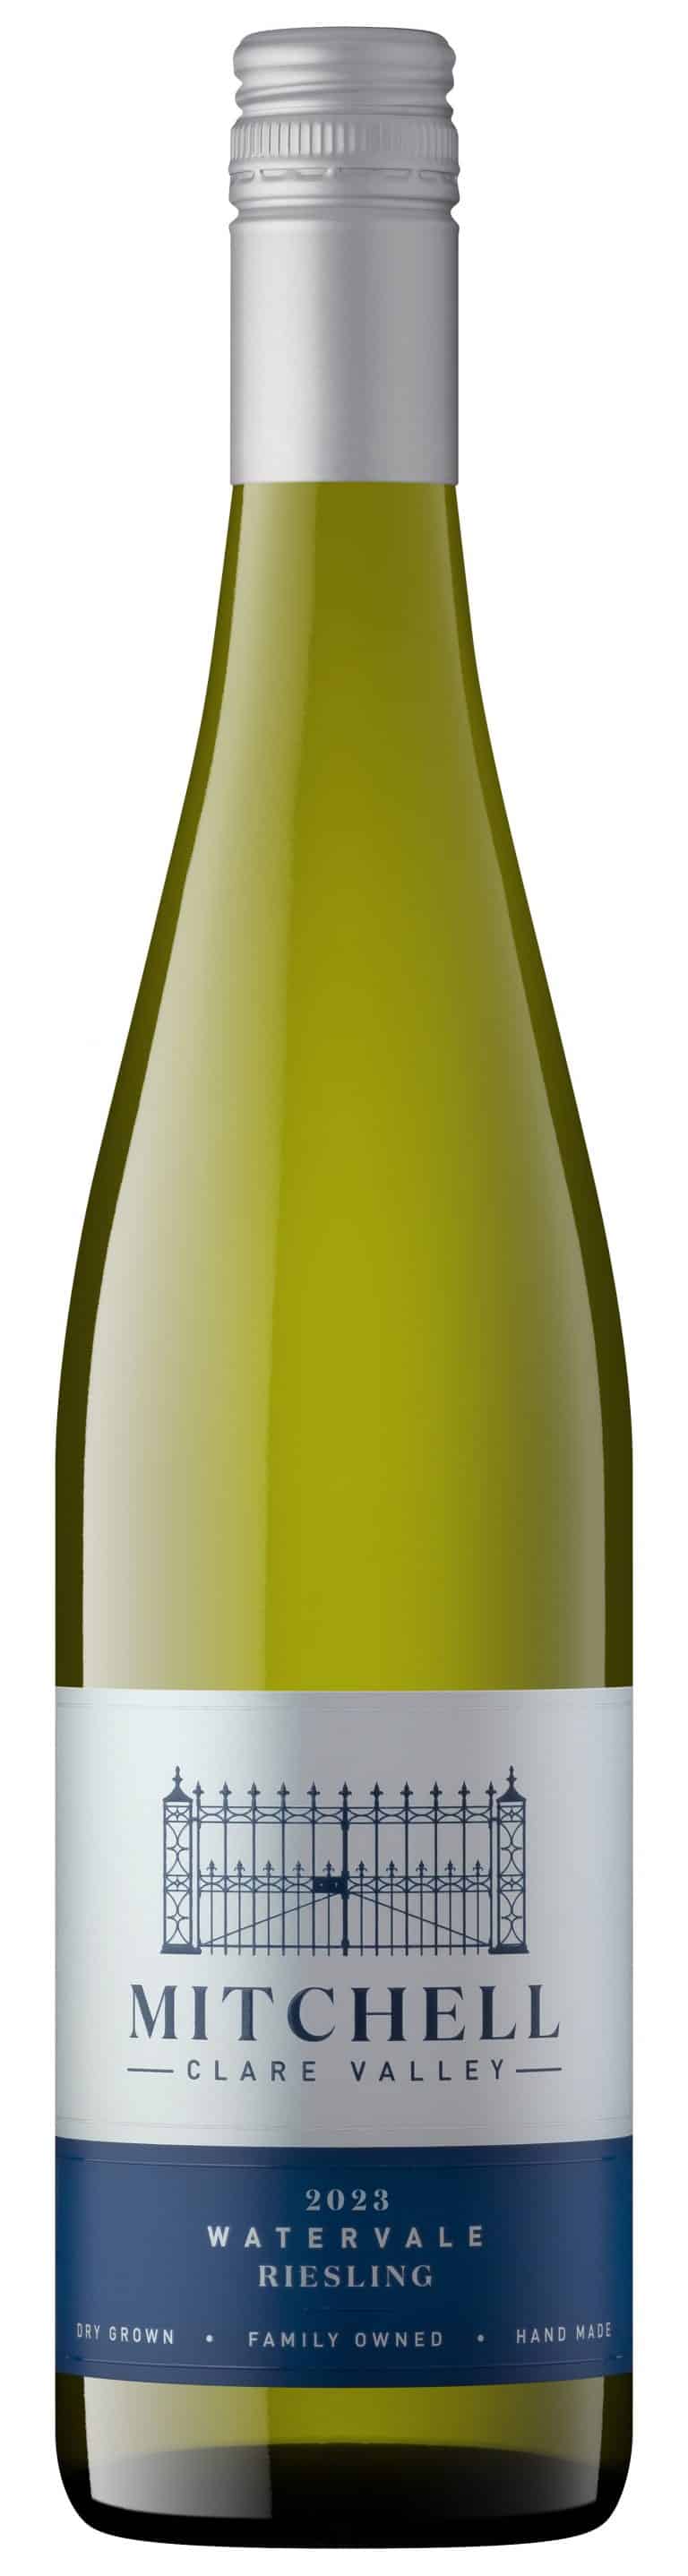 mw watervale riesling ()